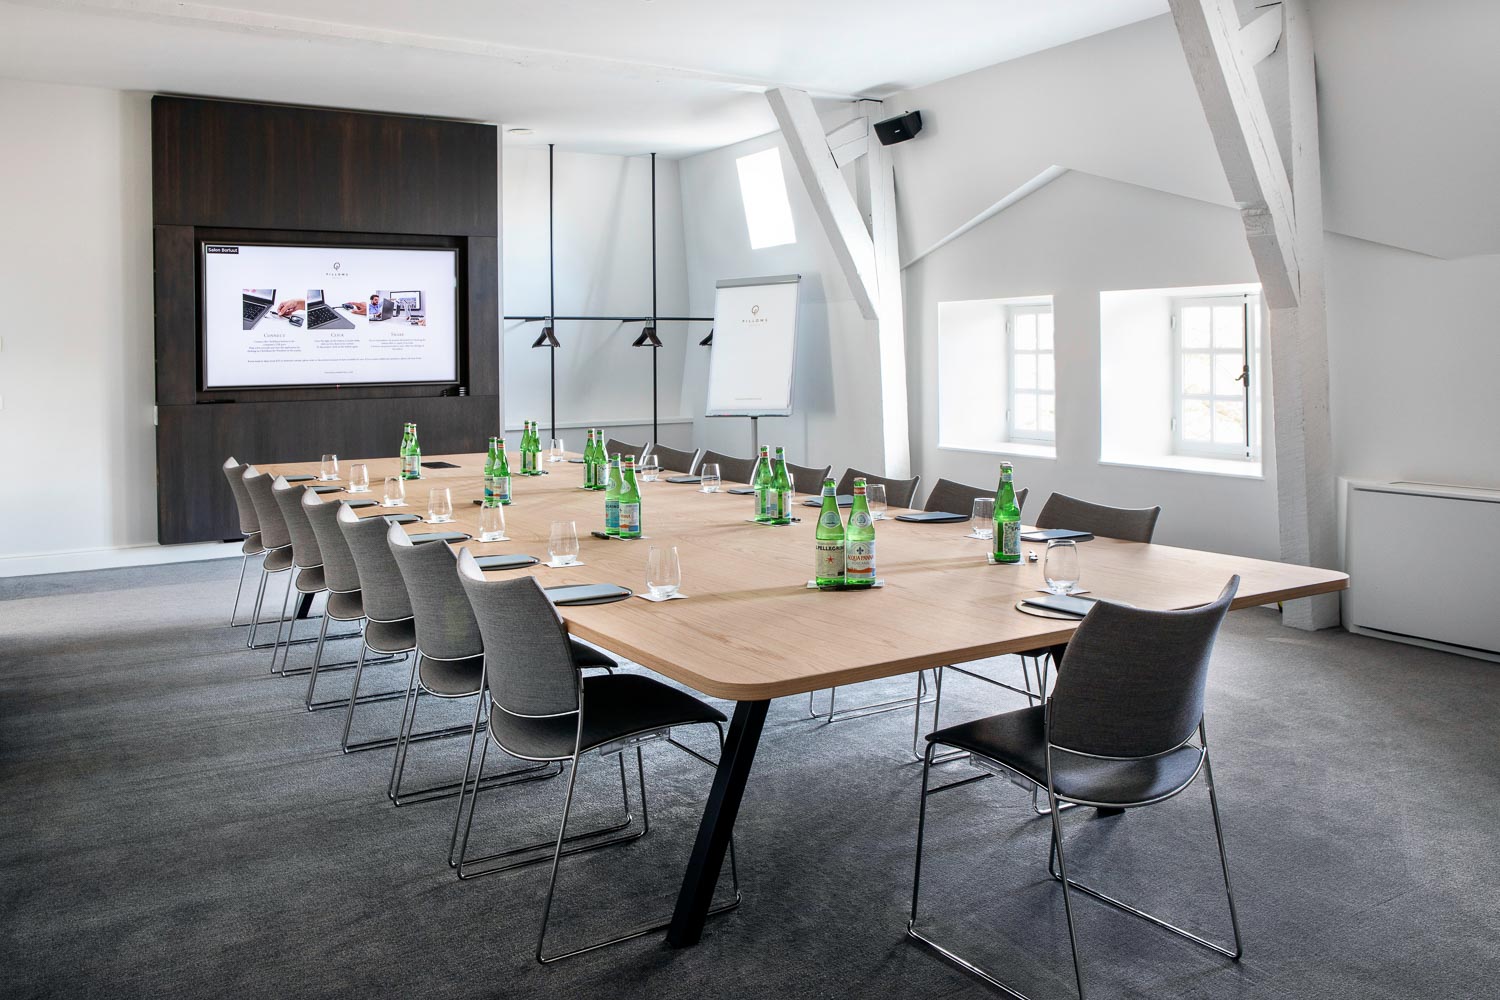 A bright meeting room table with black chairs in Pillows Hotel Reylof in Ghent